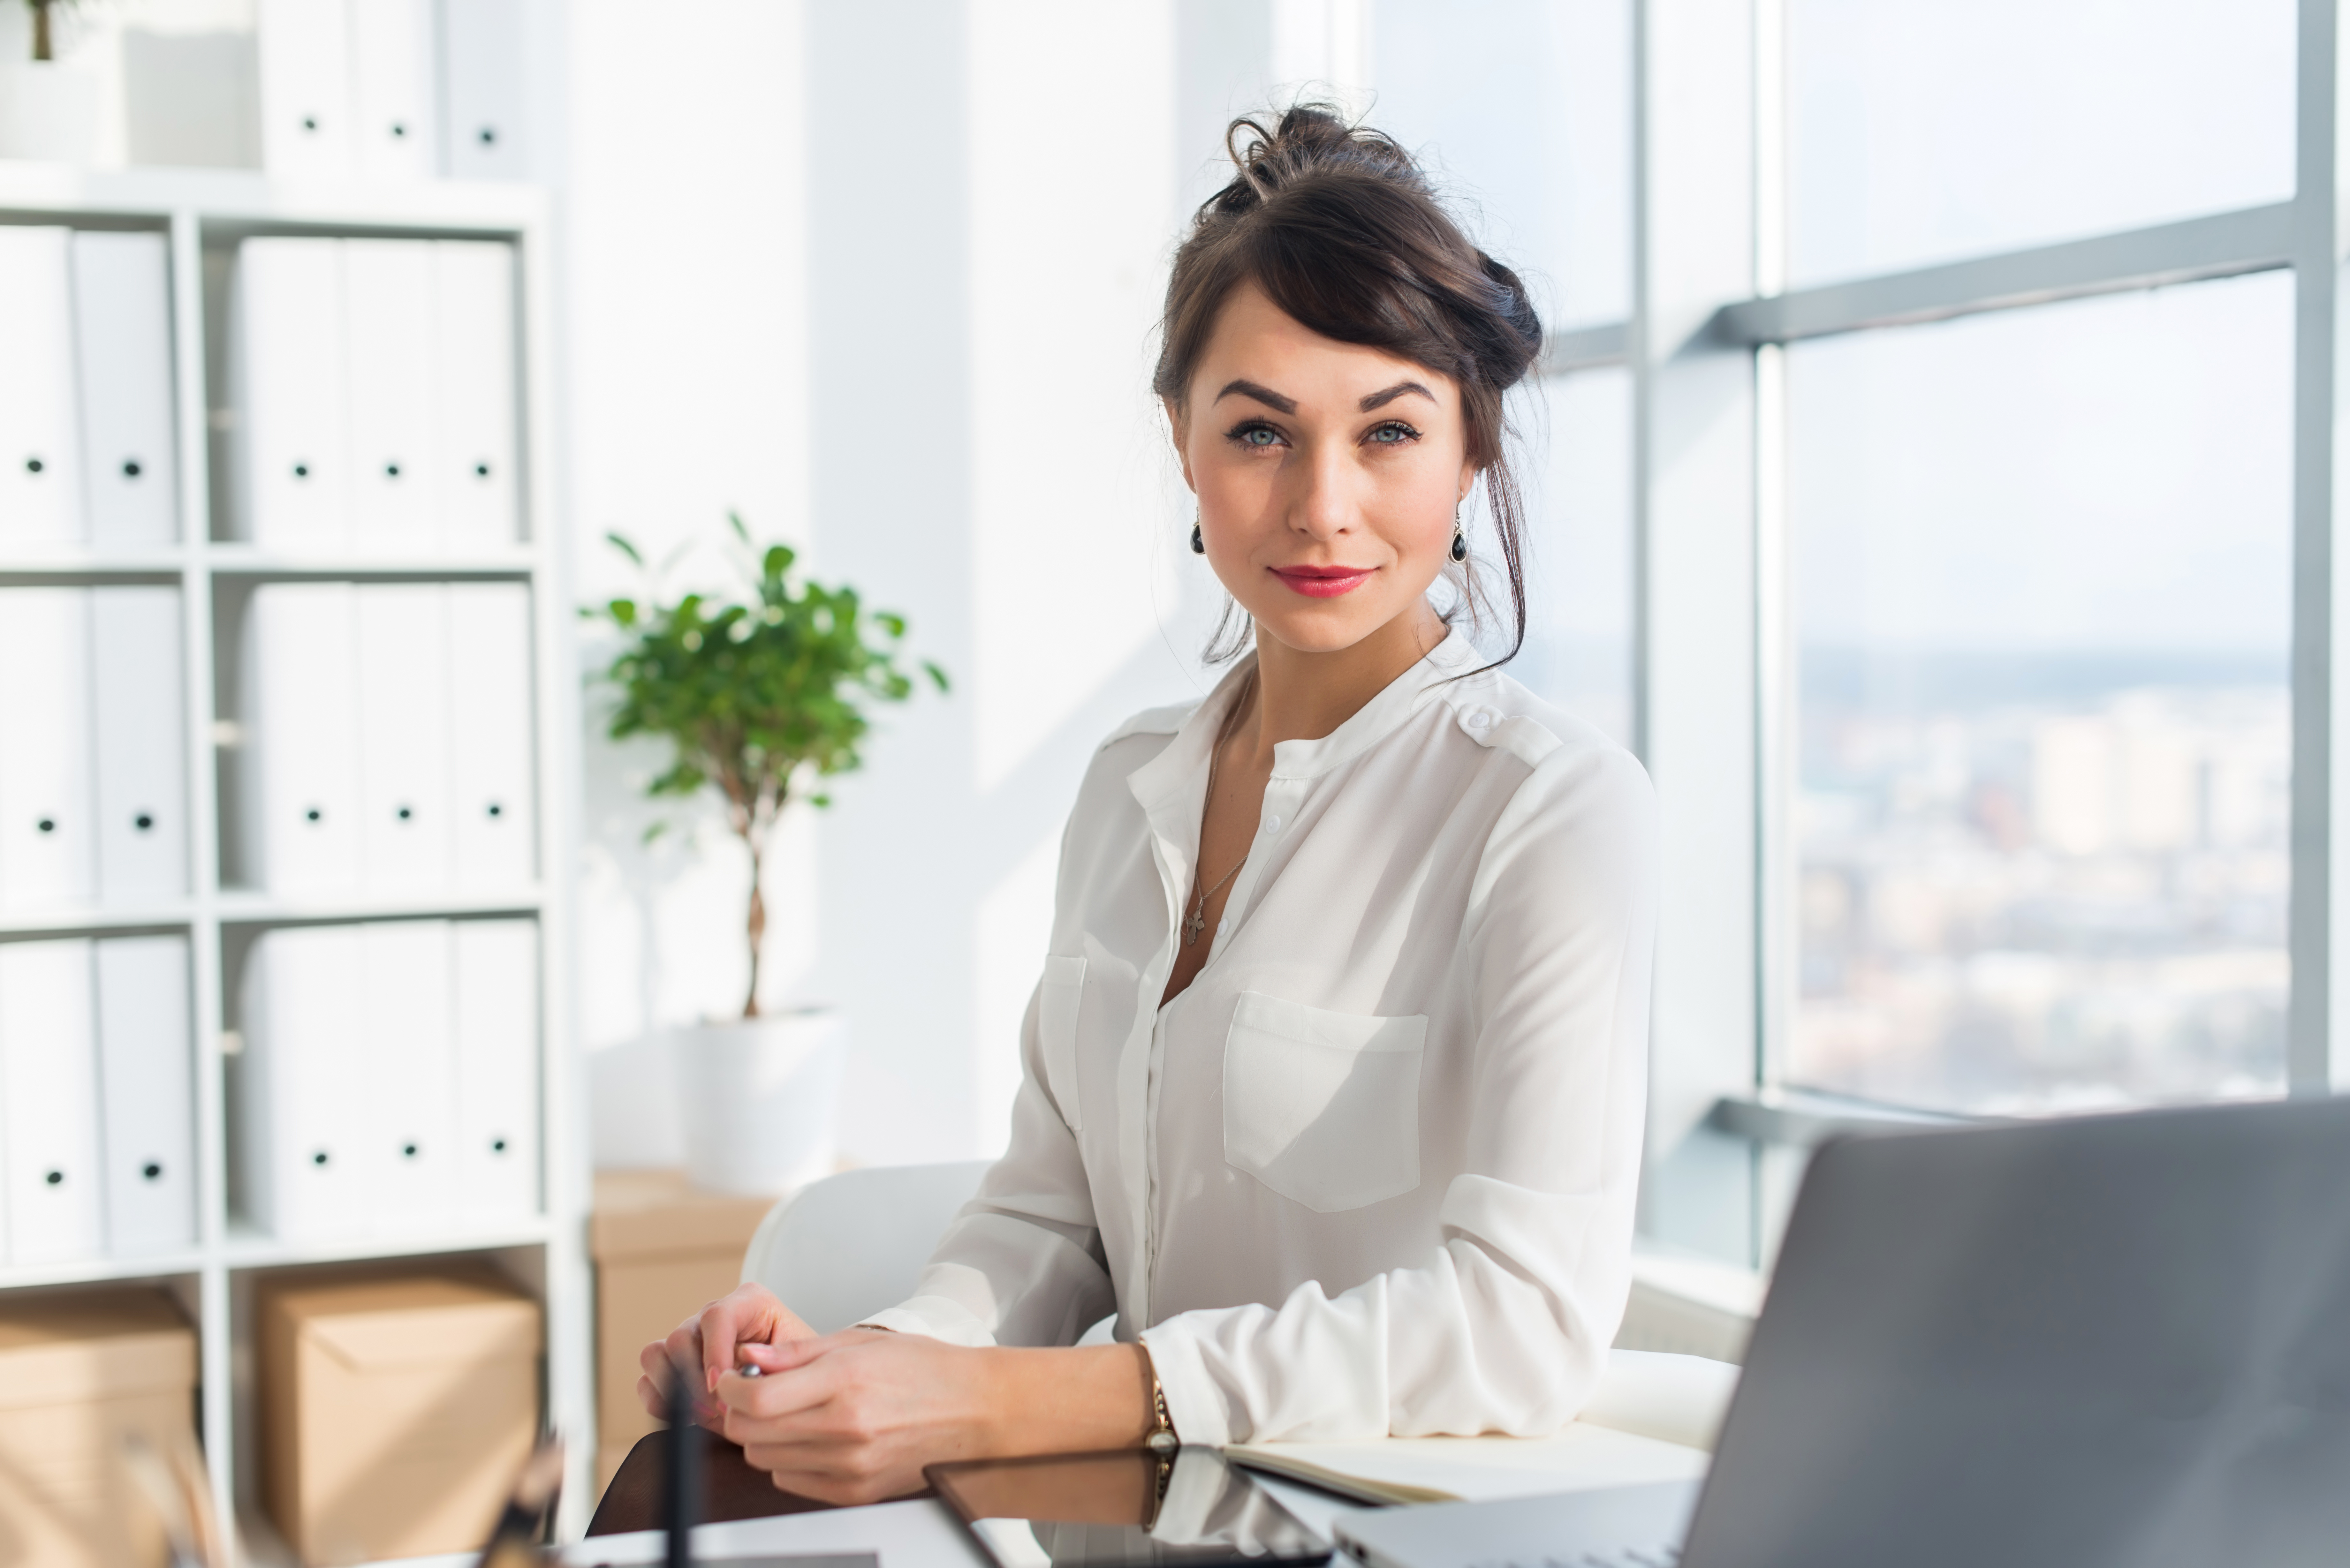 Close-up portrait of a woman sitting in modern loft office, smiling, looking at camera. Young confident female business worker ready for the work day